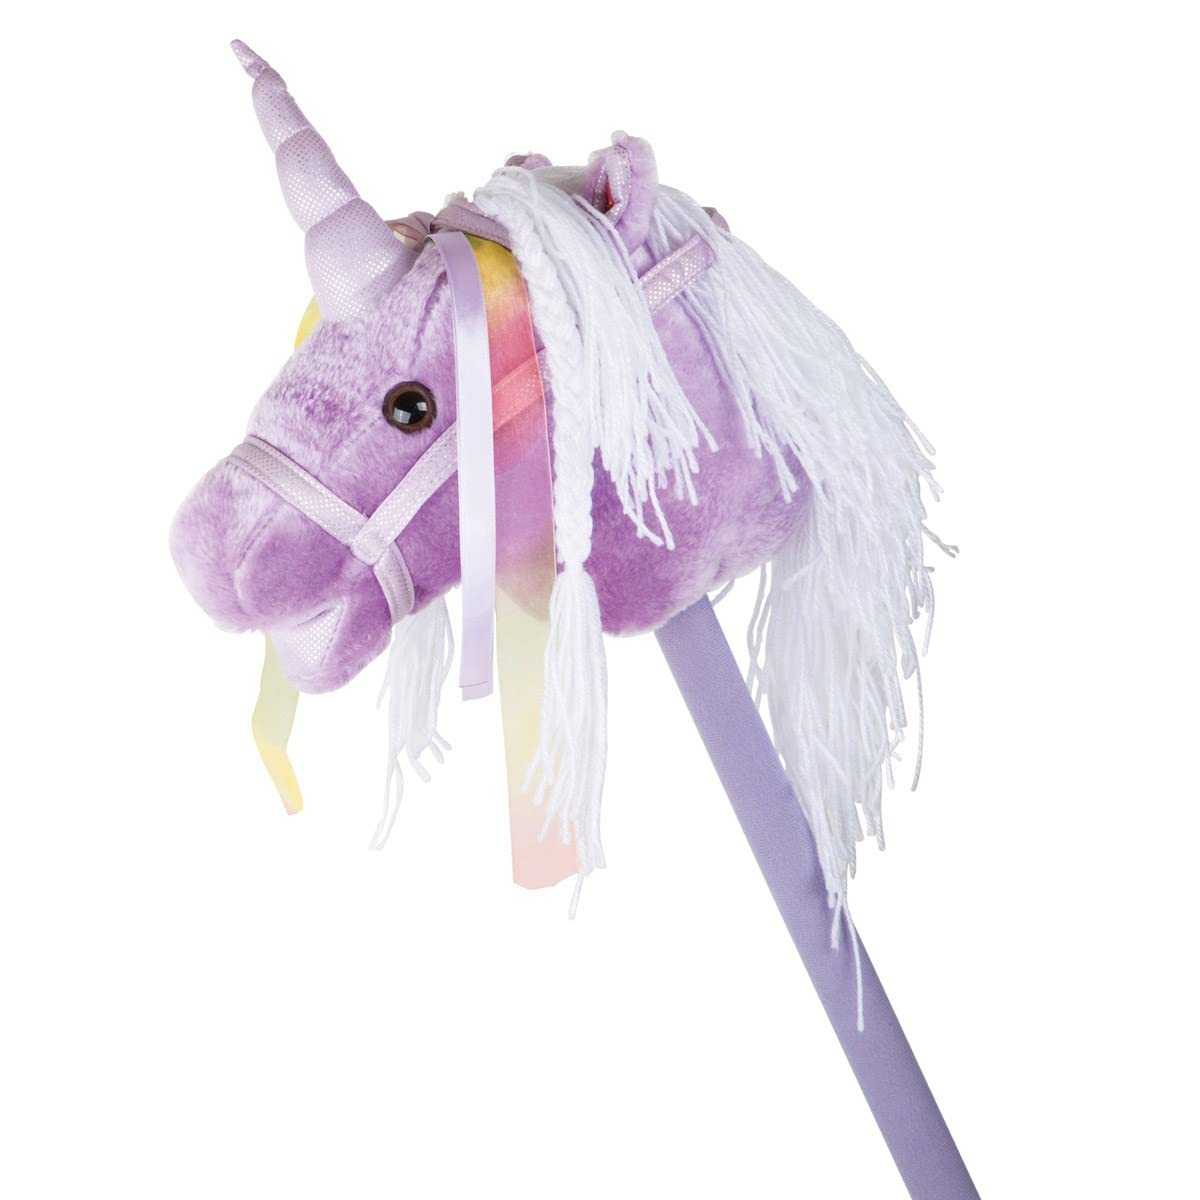 small foot wooden toys Small Foot Toys Hobby Unicorn Horse Violet with Sound Designed for Children Ages 3+ Years (10278)